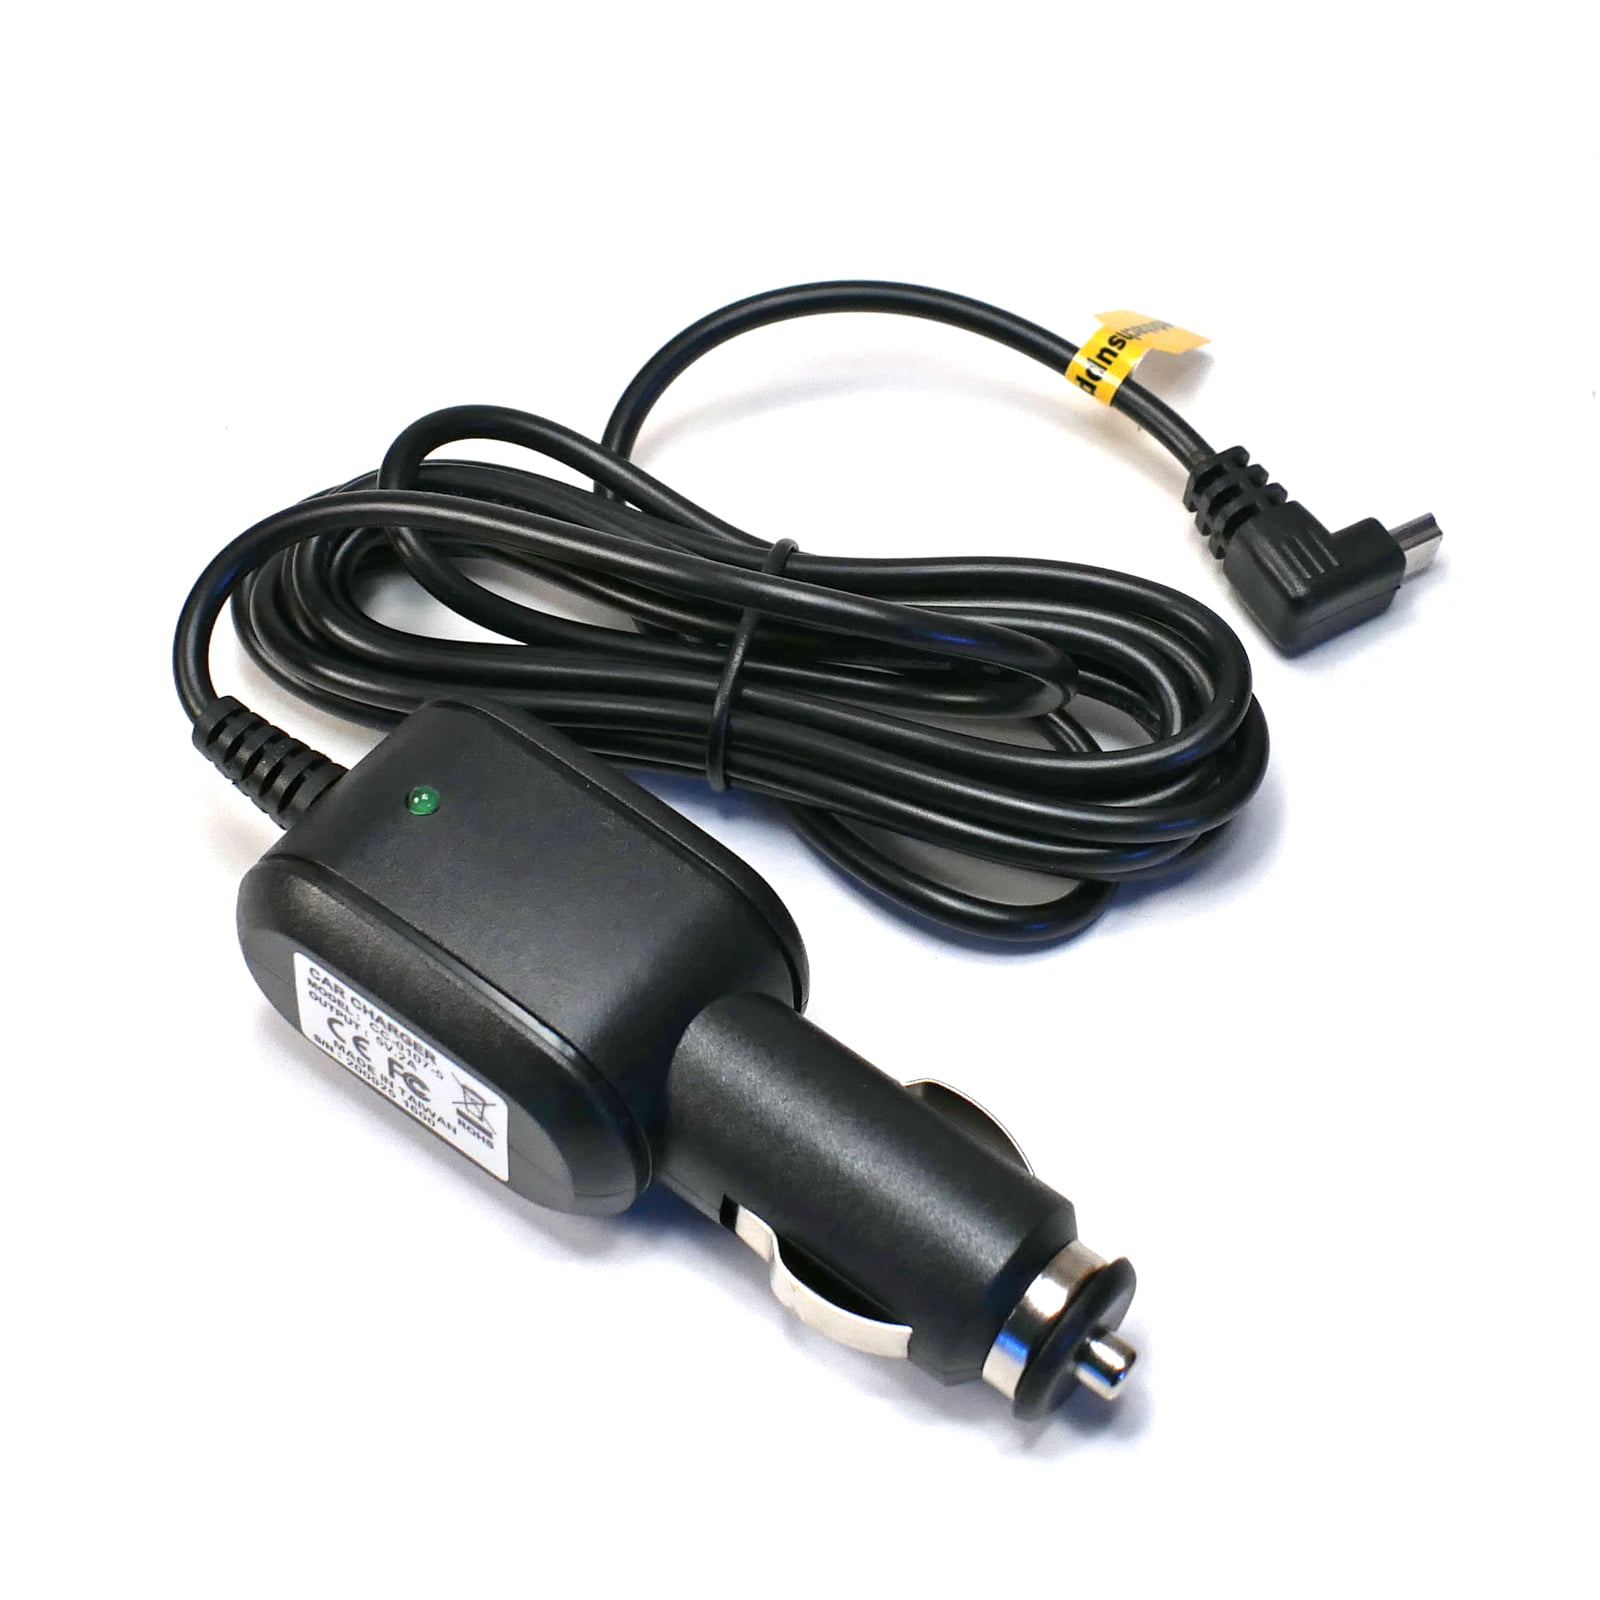 2 AMP Car Charger for Garmin Nuvi 310 1450 1480 1490 1300 1350 760 3790 GPS 